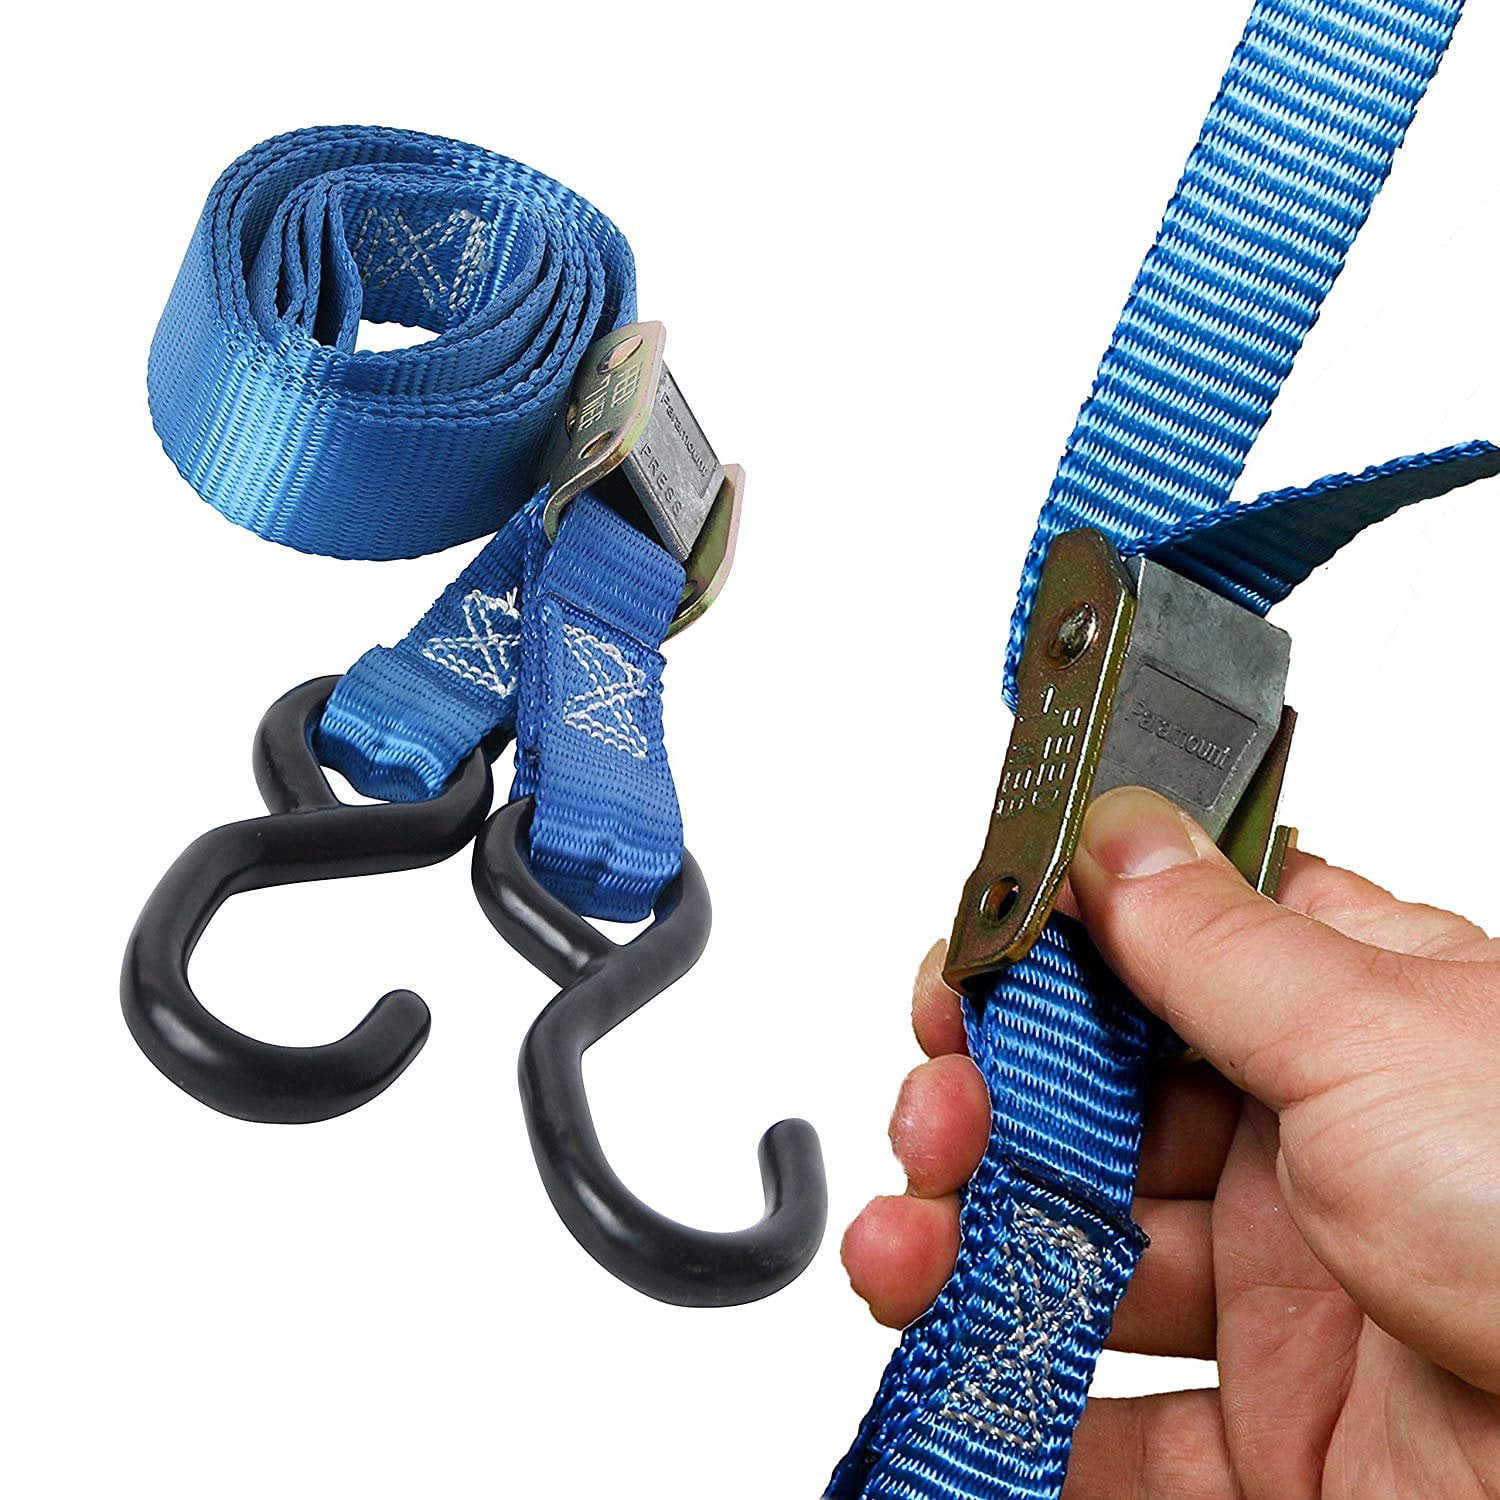 Titan Auto 800LB Limit Made of Zinc Alloy & High Tenacity Polyester All Climate Use Lashing Straps for Kayaks Fast & Easy to Use Canoes and Roof-Mounted Cargo Cam Buckle Tie Down Straps